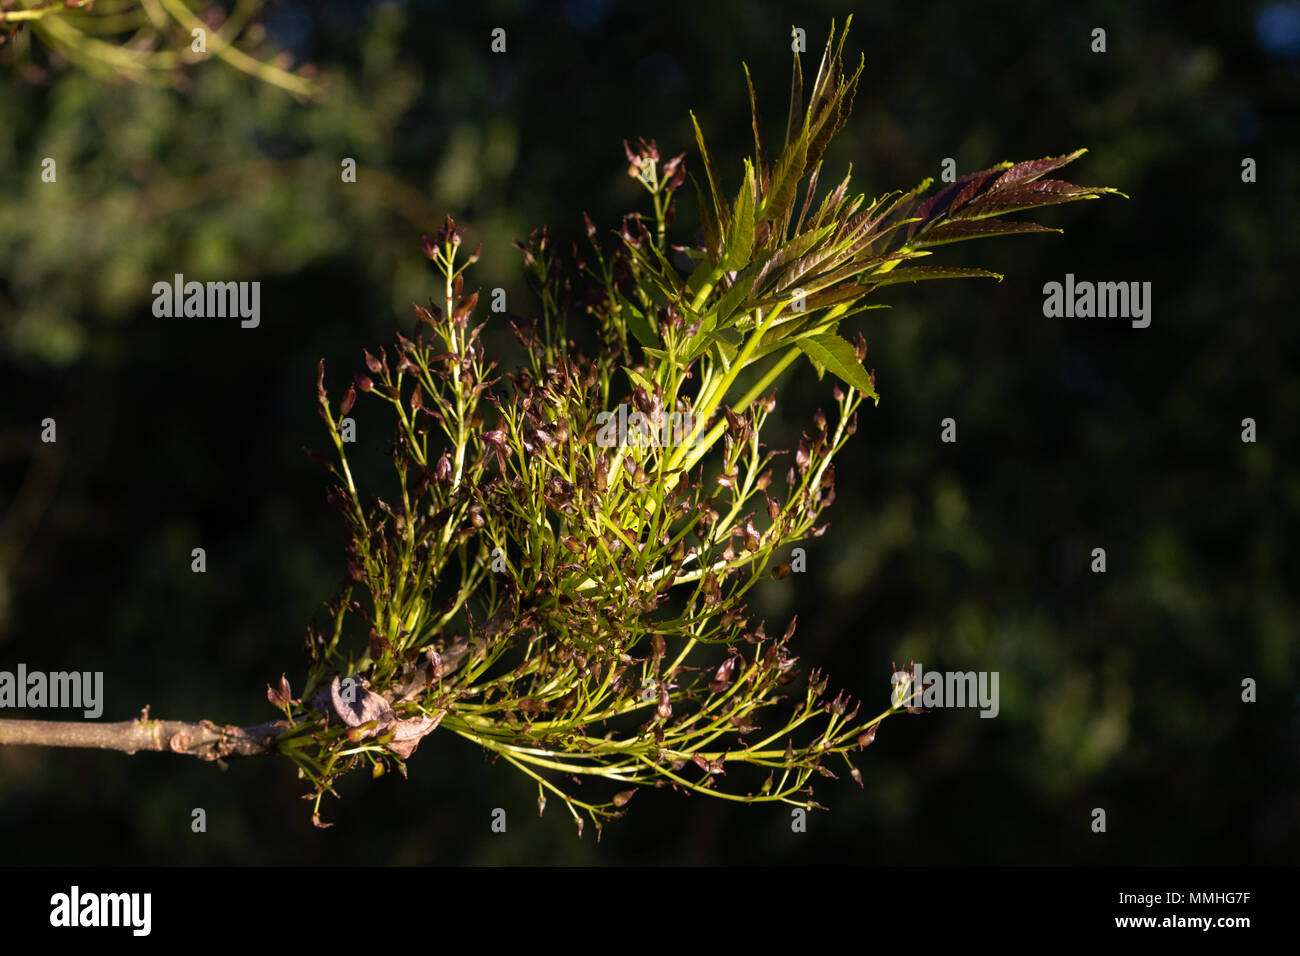 Common Ash (Fraxinus excelsior).  Fresh leaves, old flowers and fruiting bodies (seeds) Stock Photo